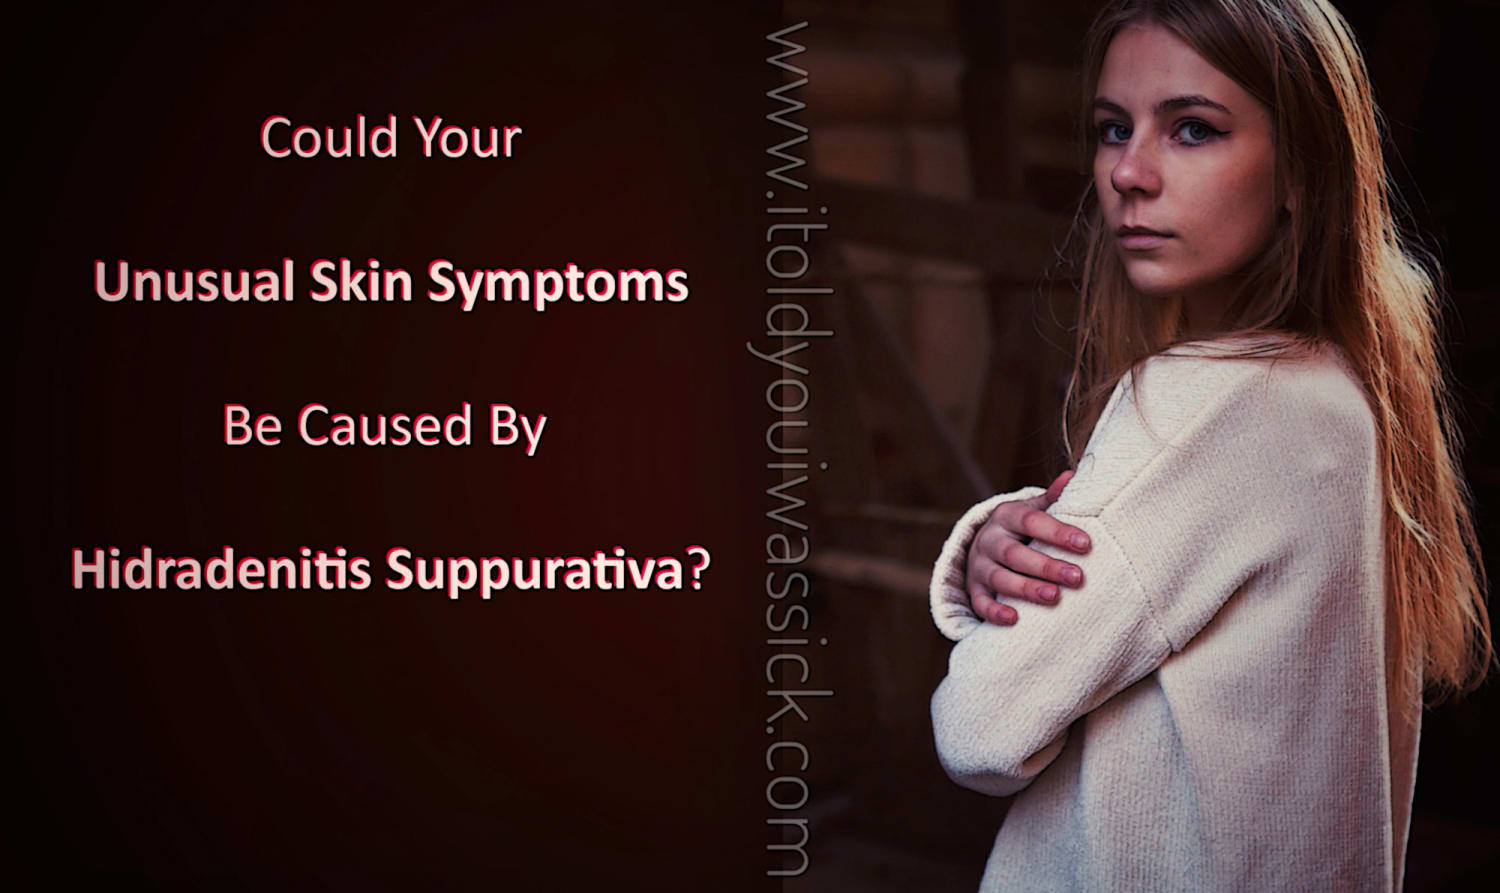 Could Your Unusual Skin Symptoms Be Caused By Hidradenitis Suppurativa? - I Told You I Was Sick